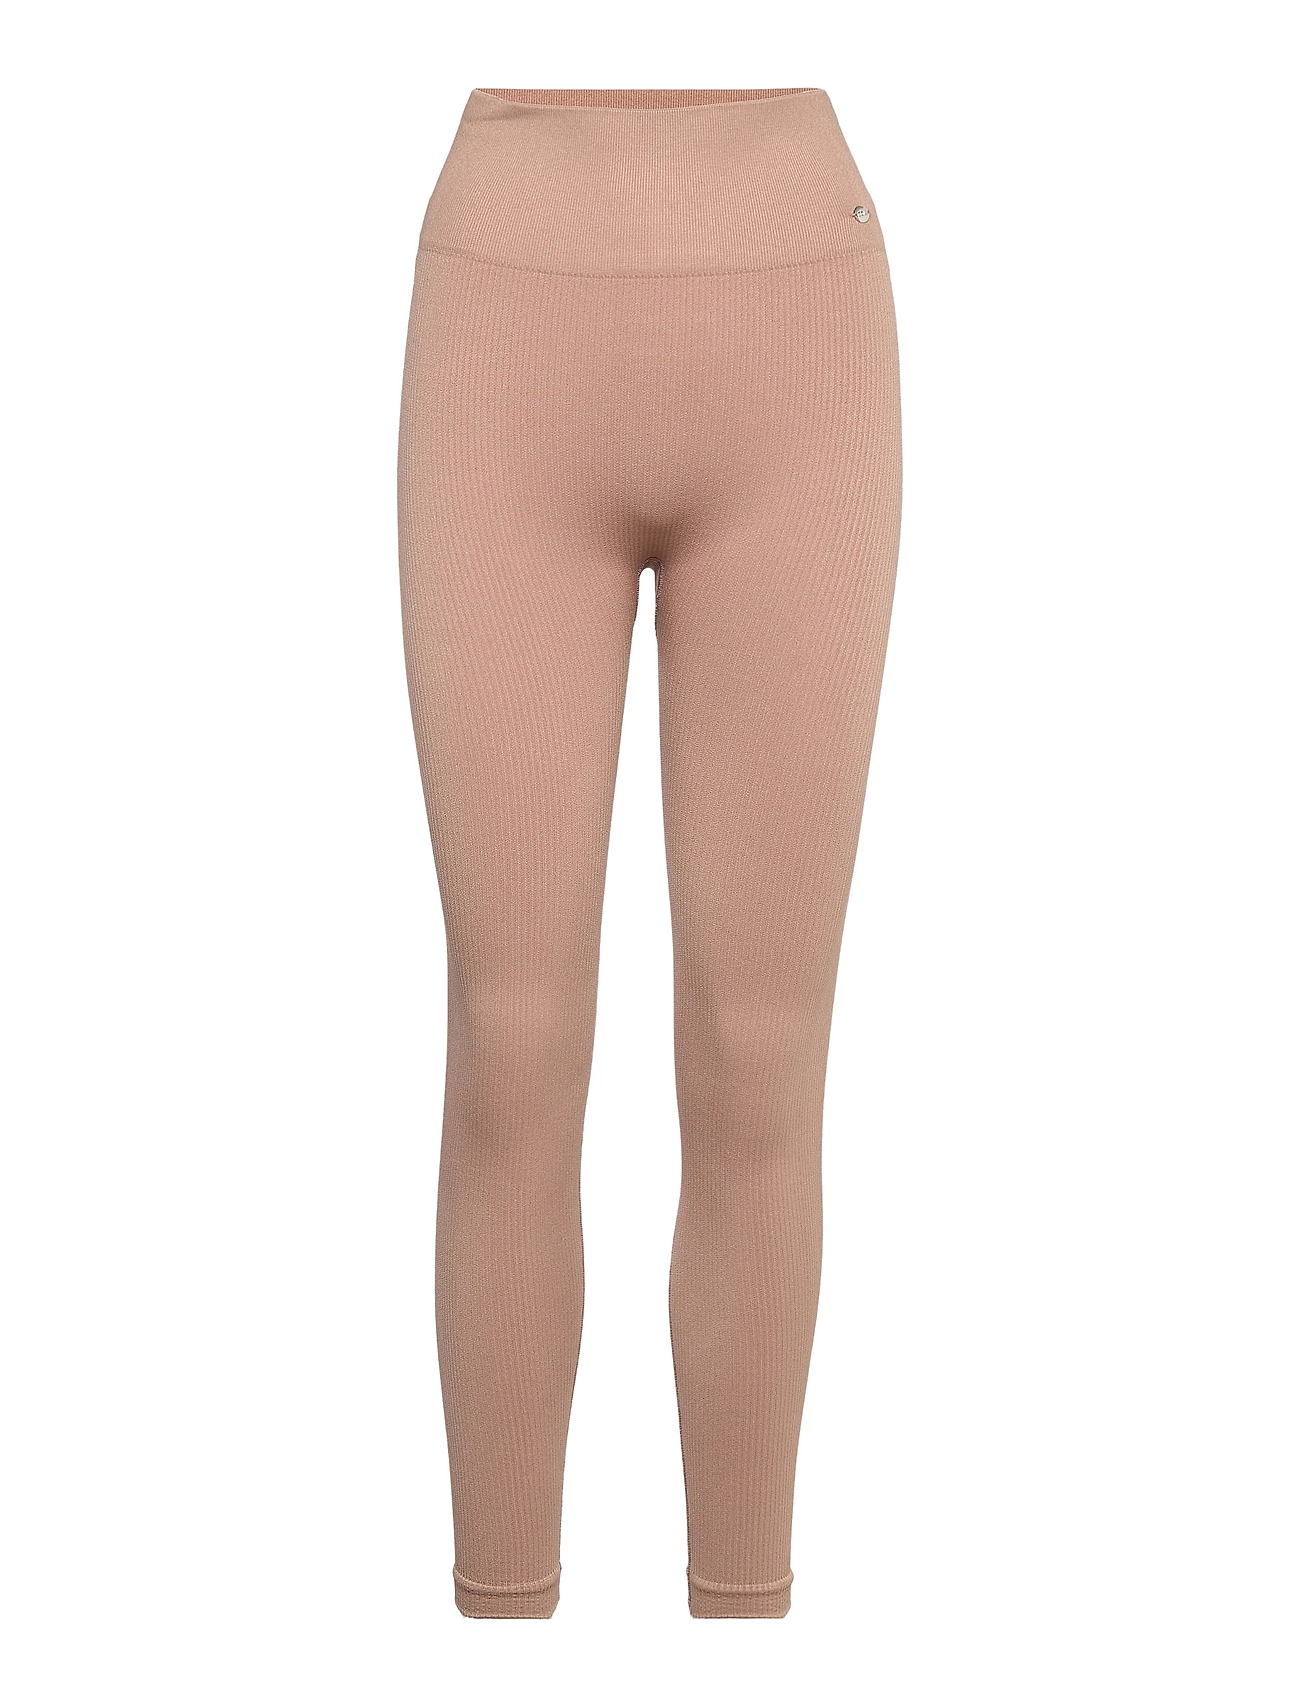 Molly Sport Running-training Tights Beige Drop Of Mindfulness